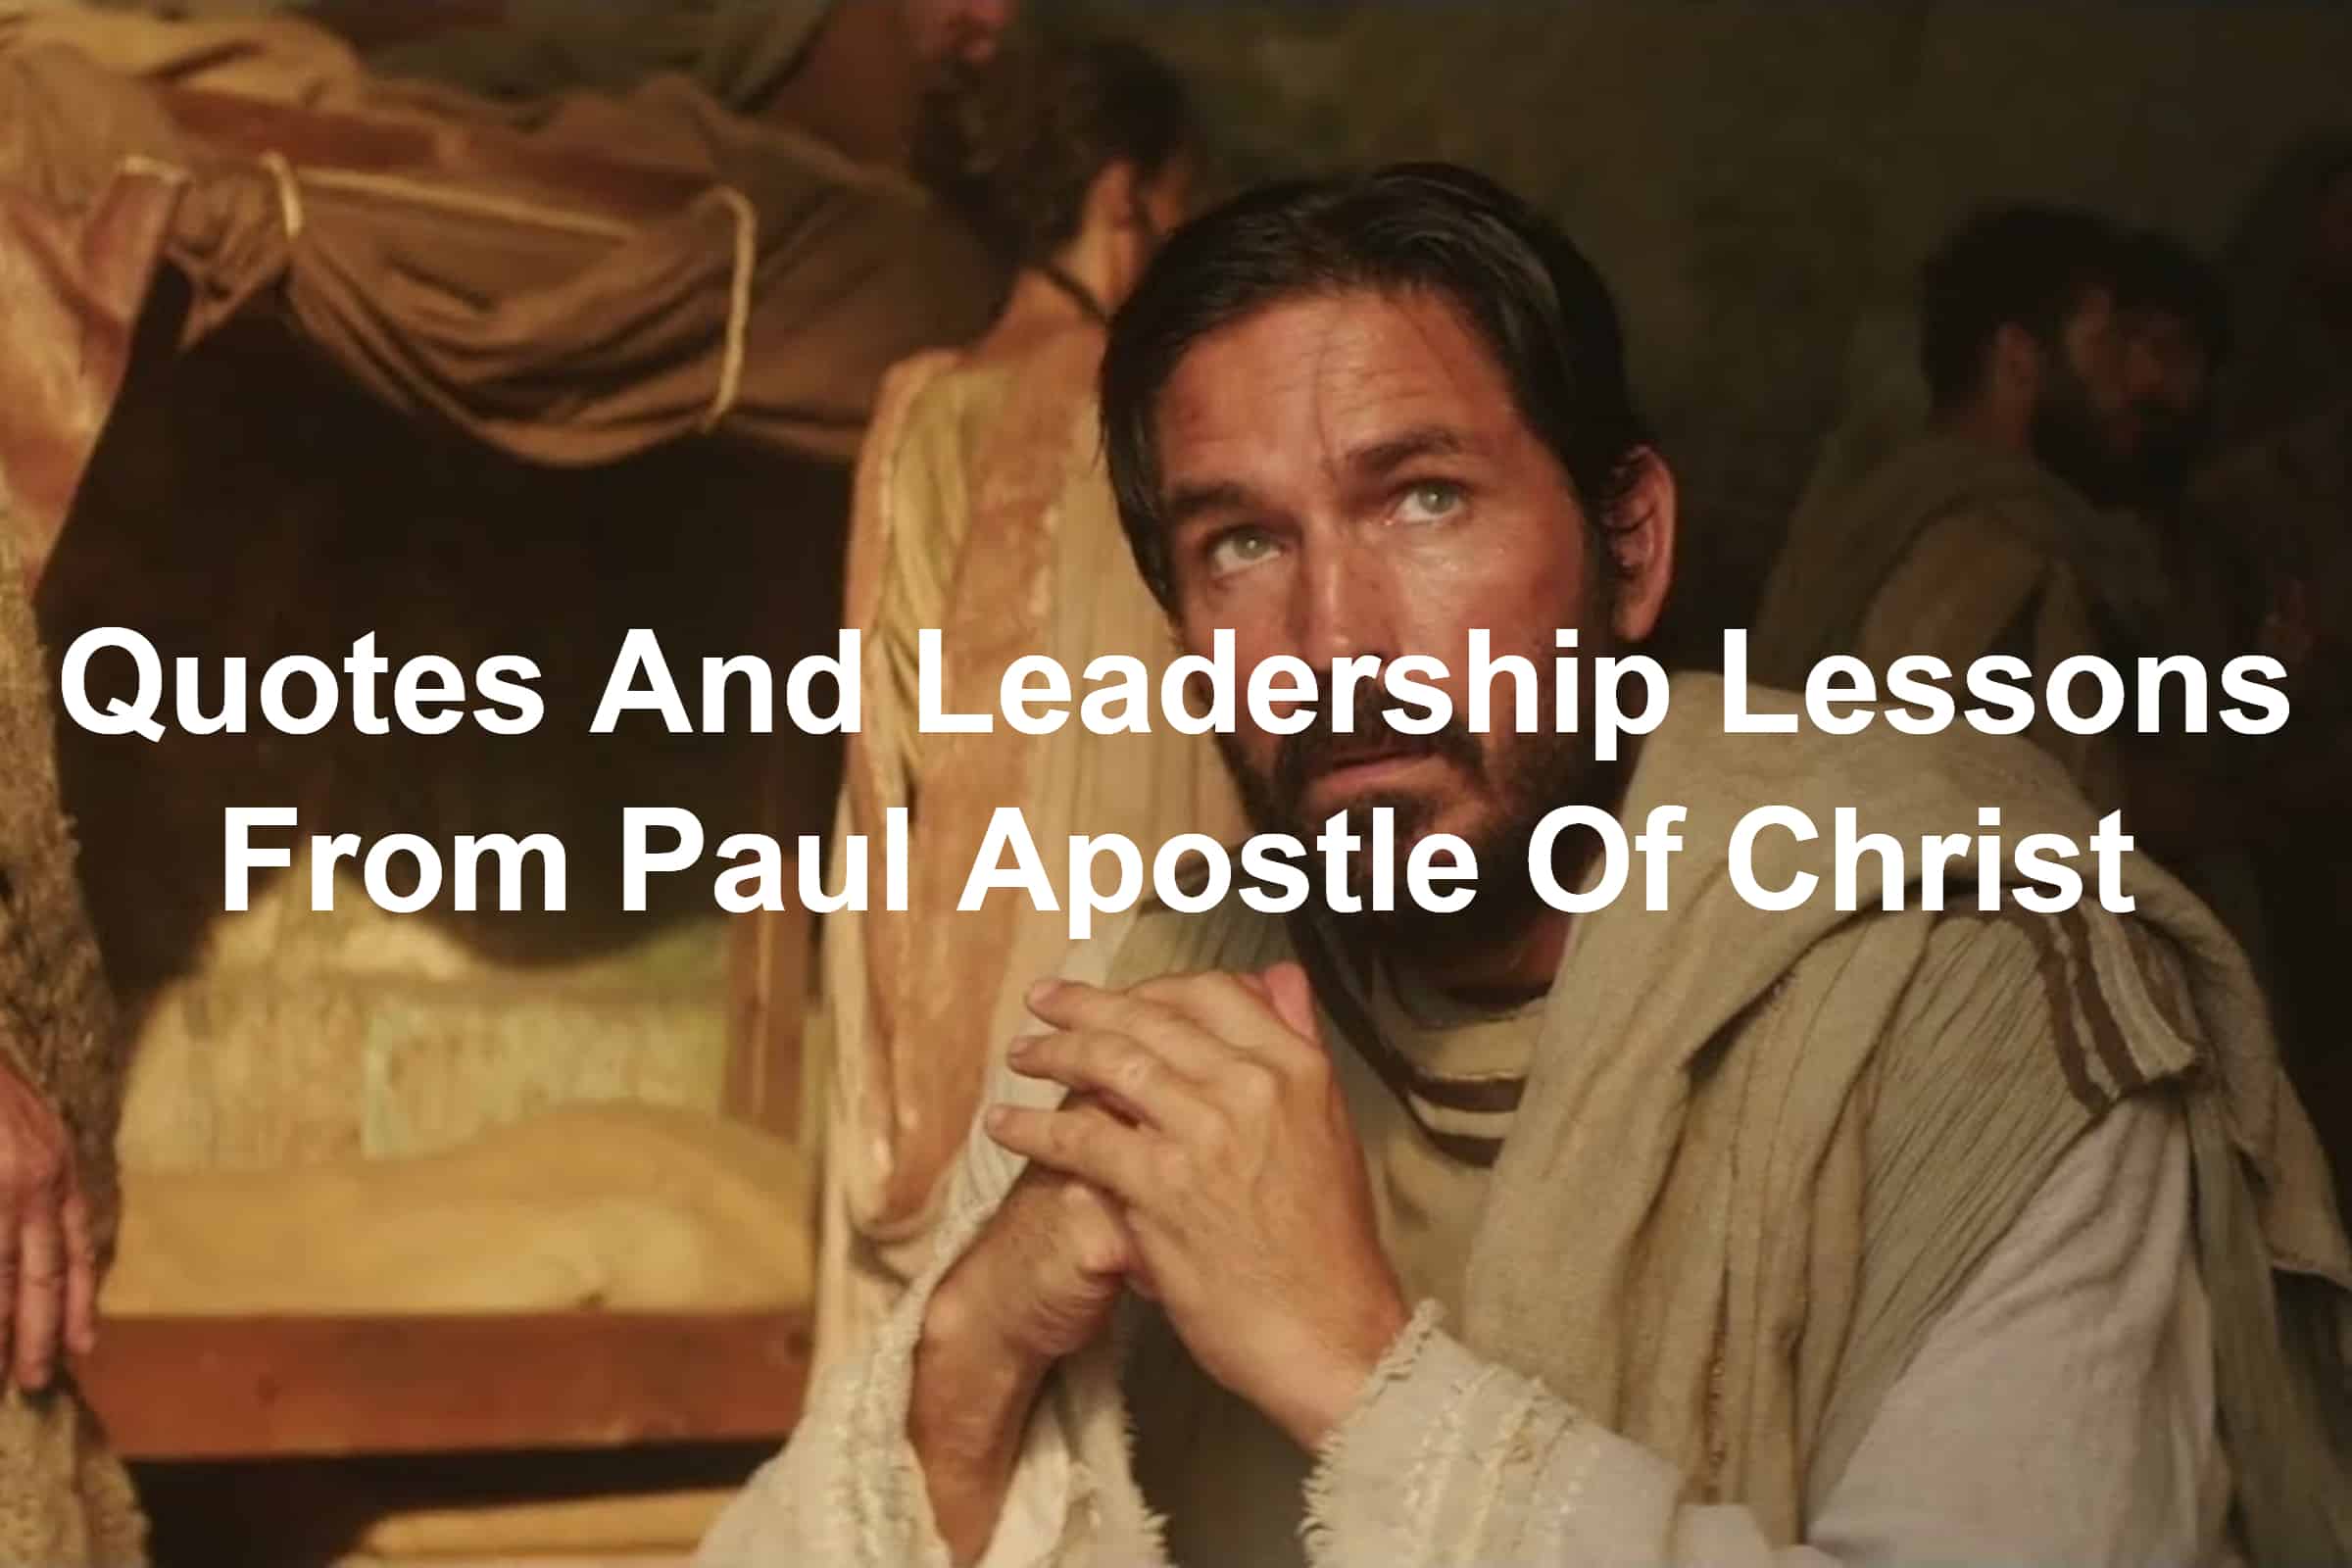 Jim Caviezel as Luke the Physician In Paul Apostle Of Christ Leadership Lessons